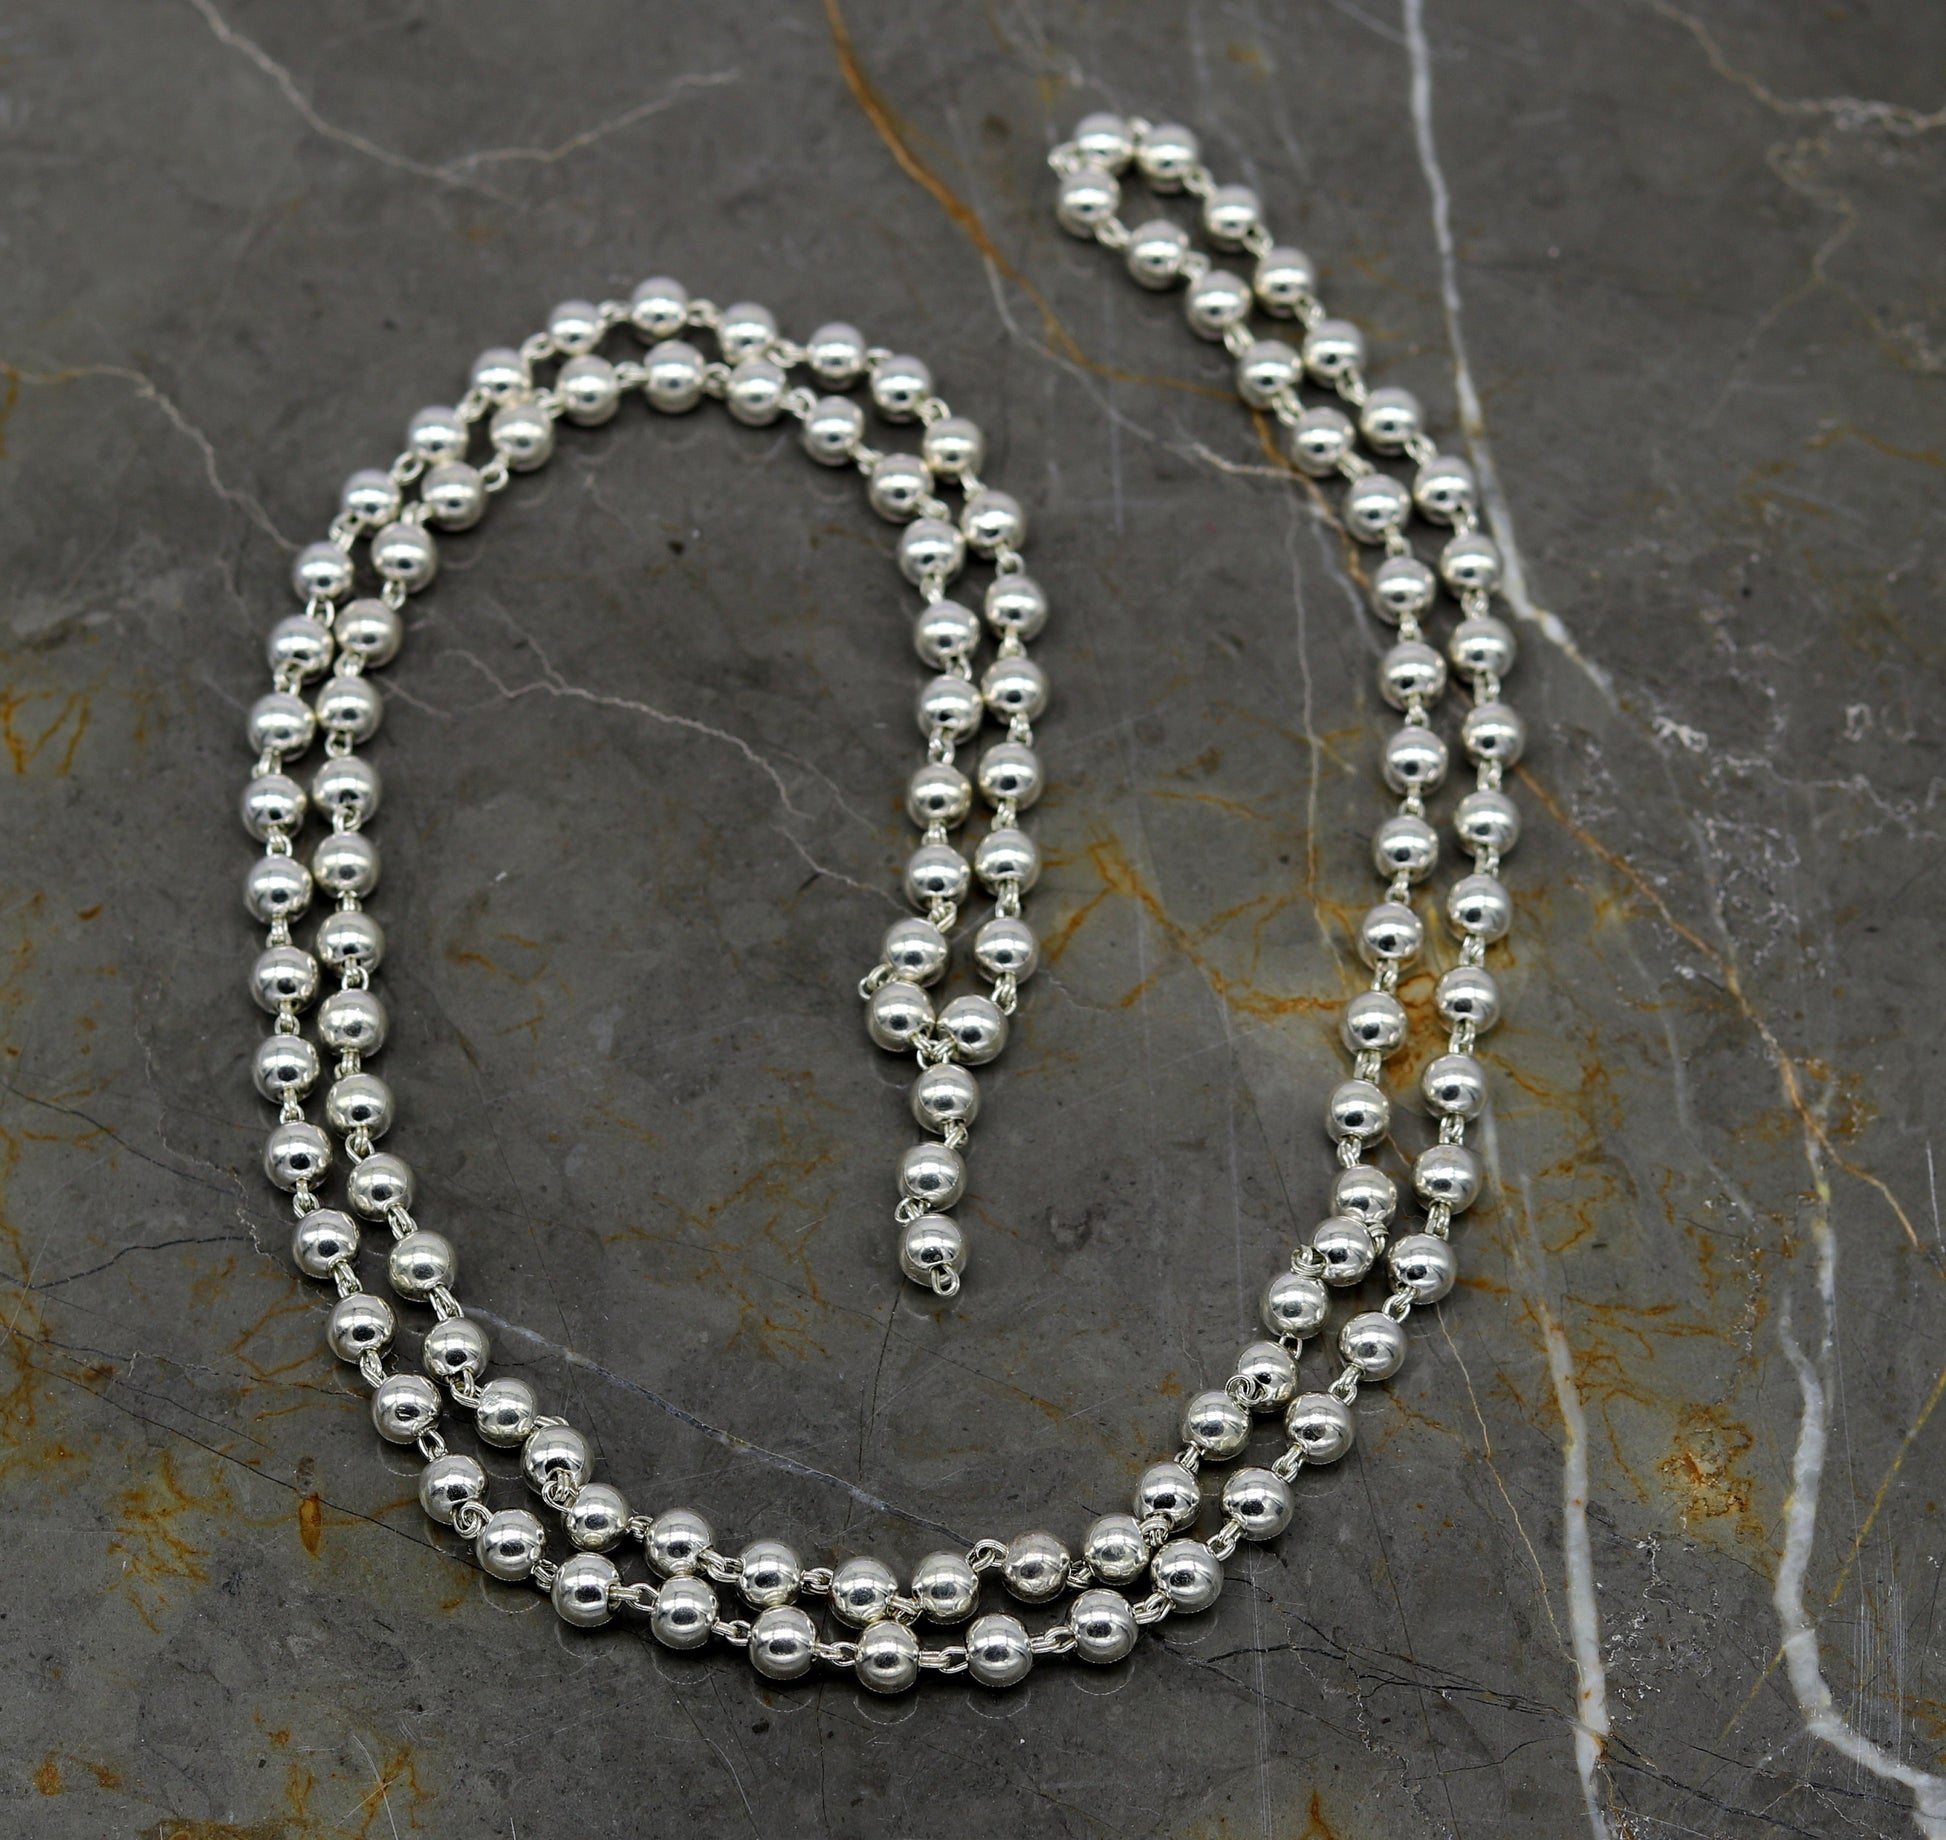 108 beads chanting japp mala solid silver beads chain necklace, fabulous 6mm beaded necklace for chanting mantra, gifting jewelry ch98 - TRIBAL ORNAMENTS